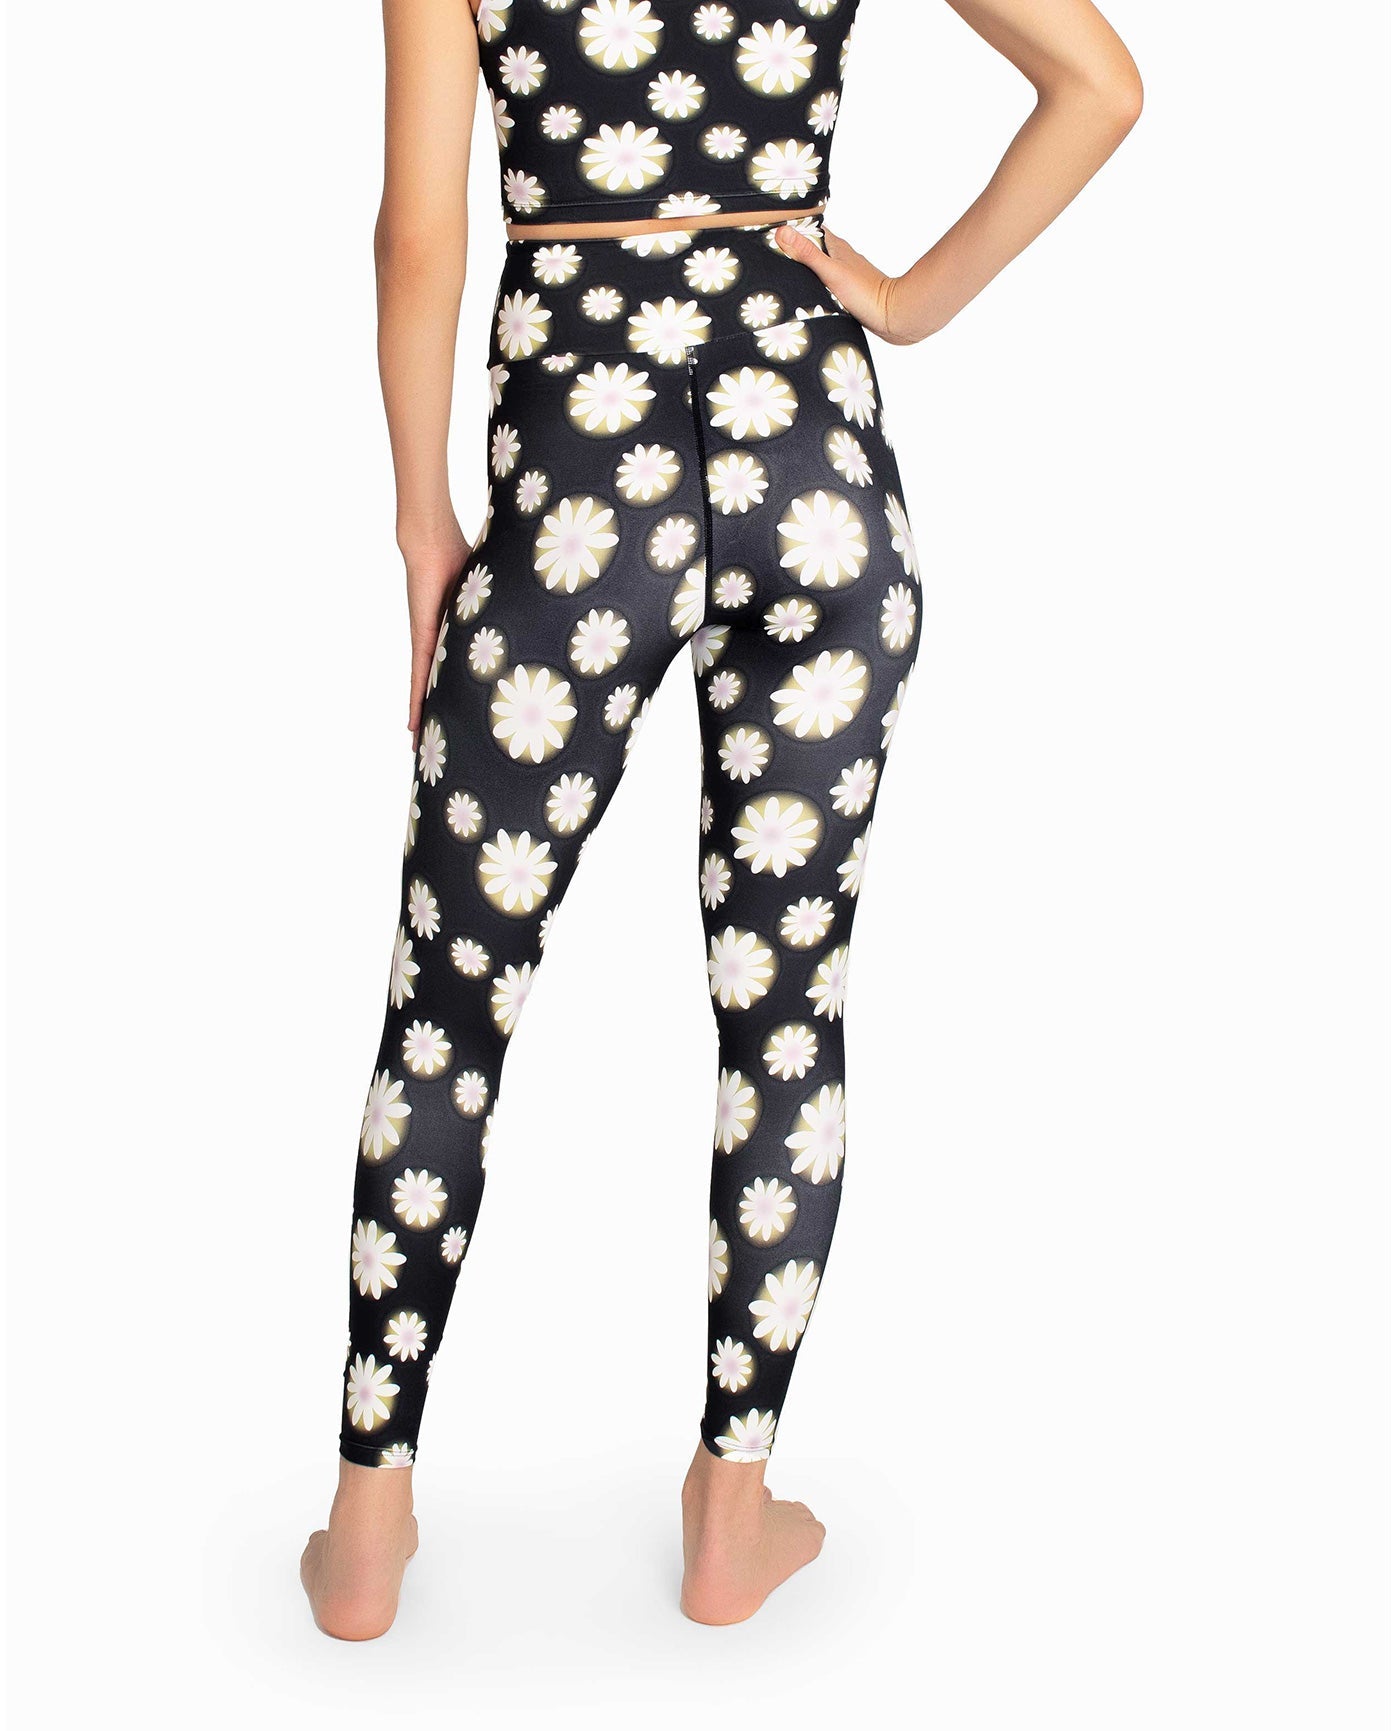 Nicole Miller Leggings for Women with Pockets - India